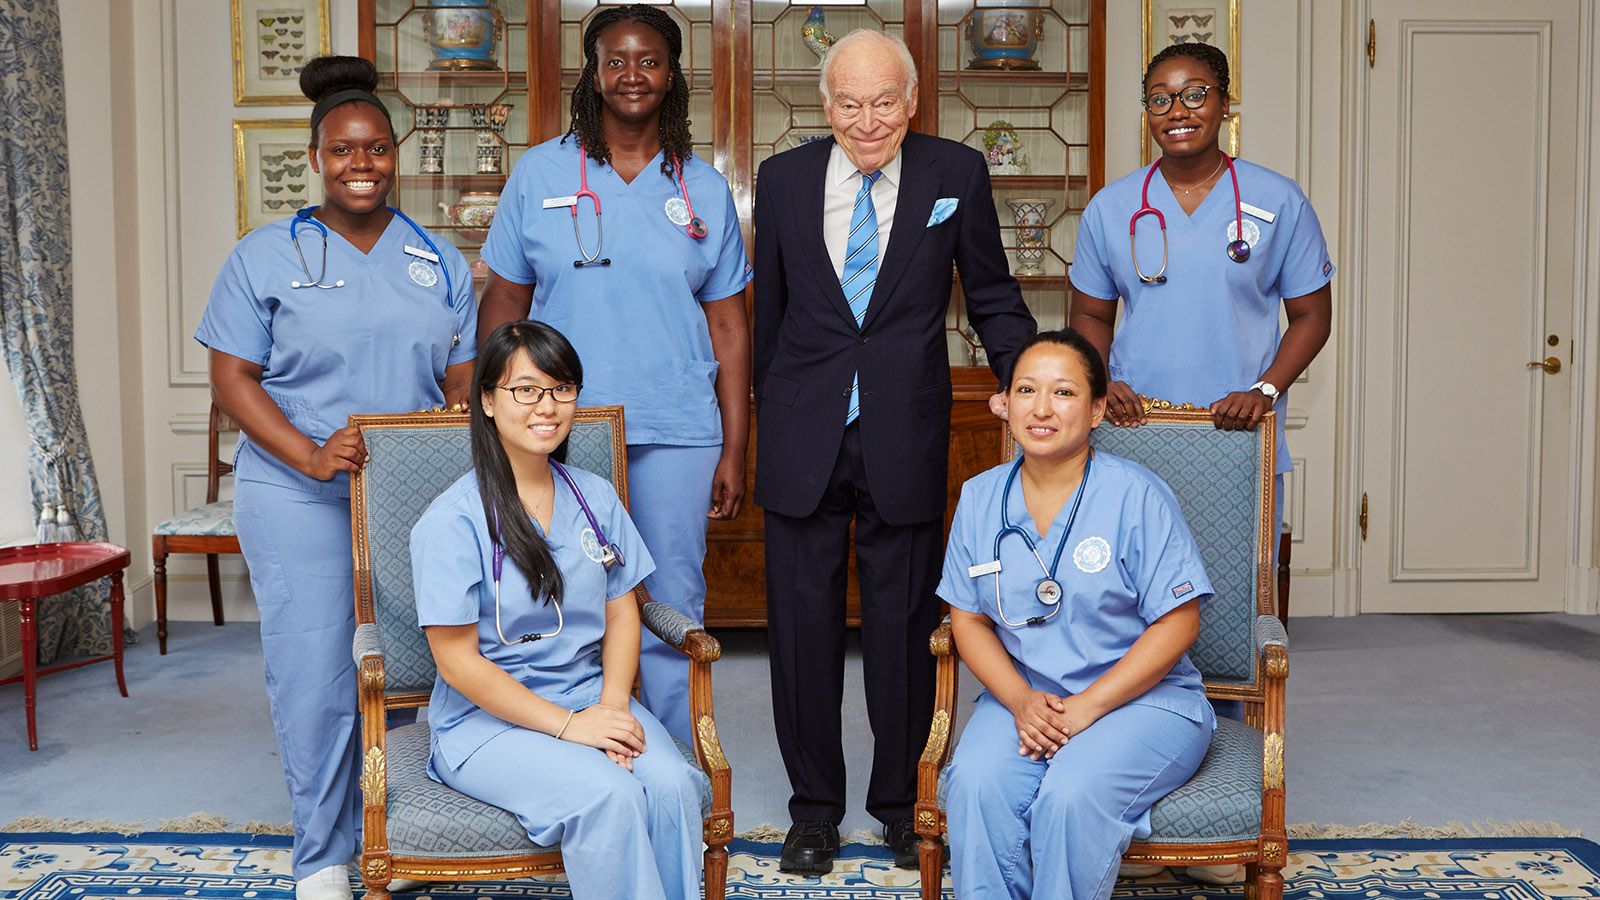 Leonard A. Lauder with students from Hunter College School of Nursing